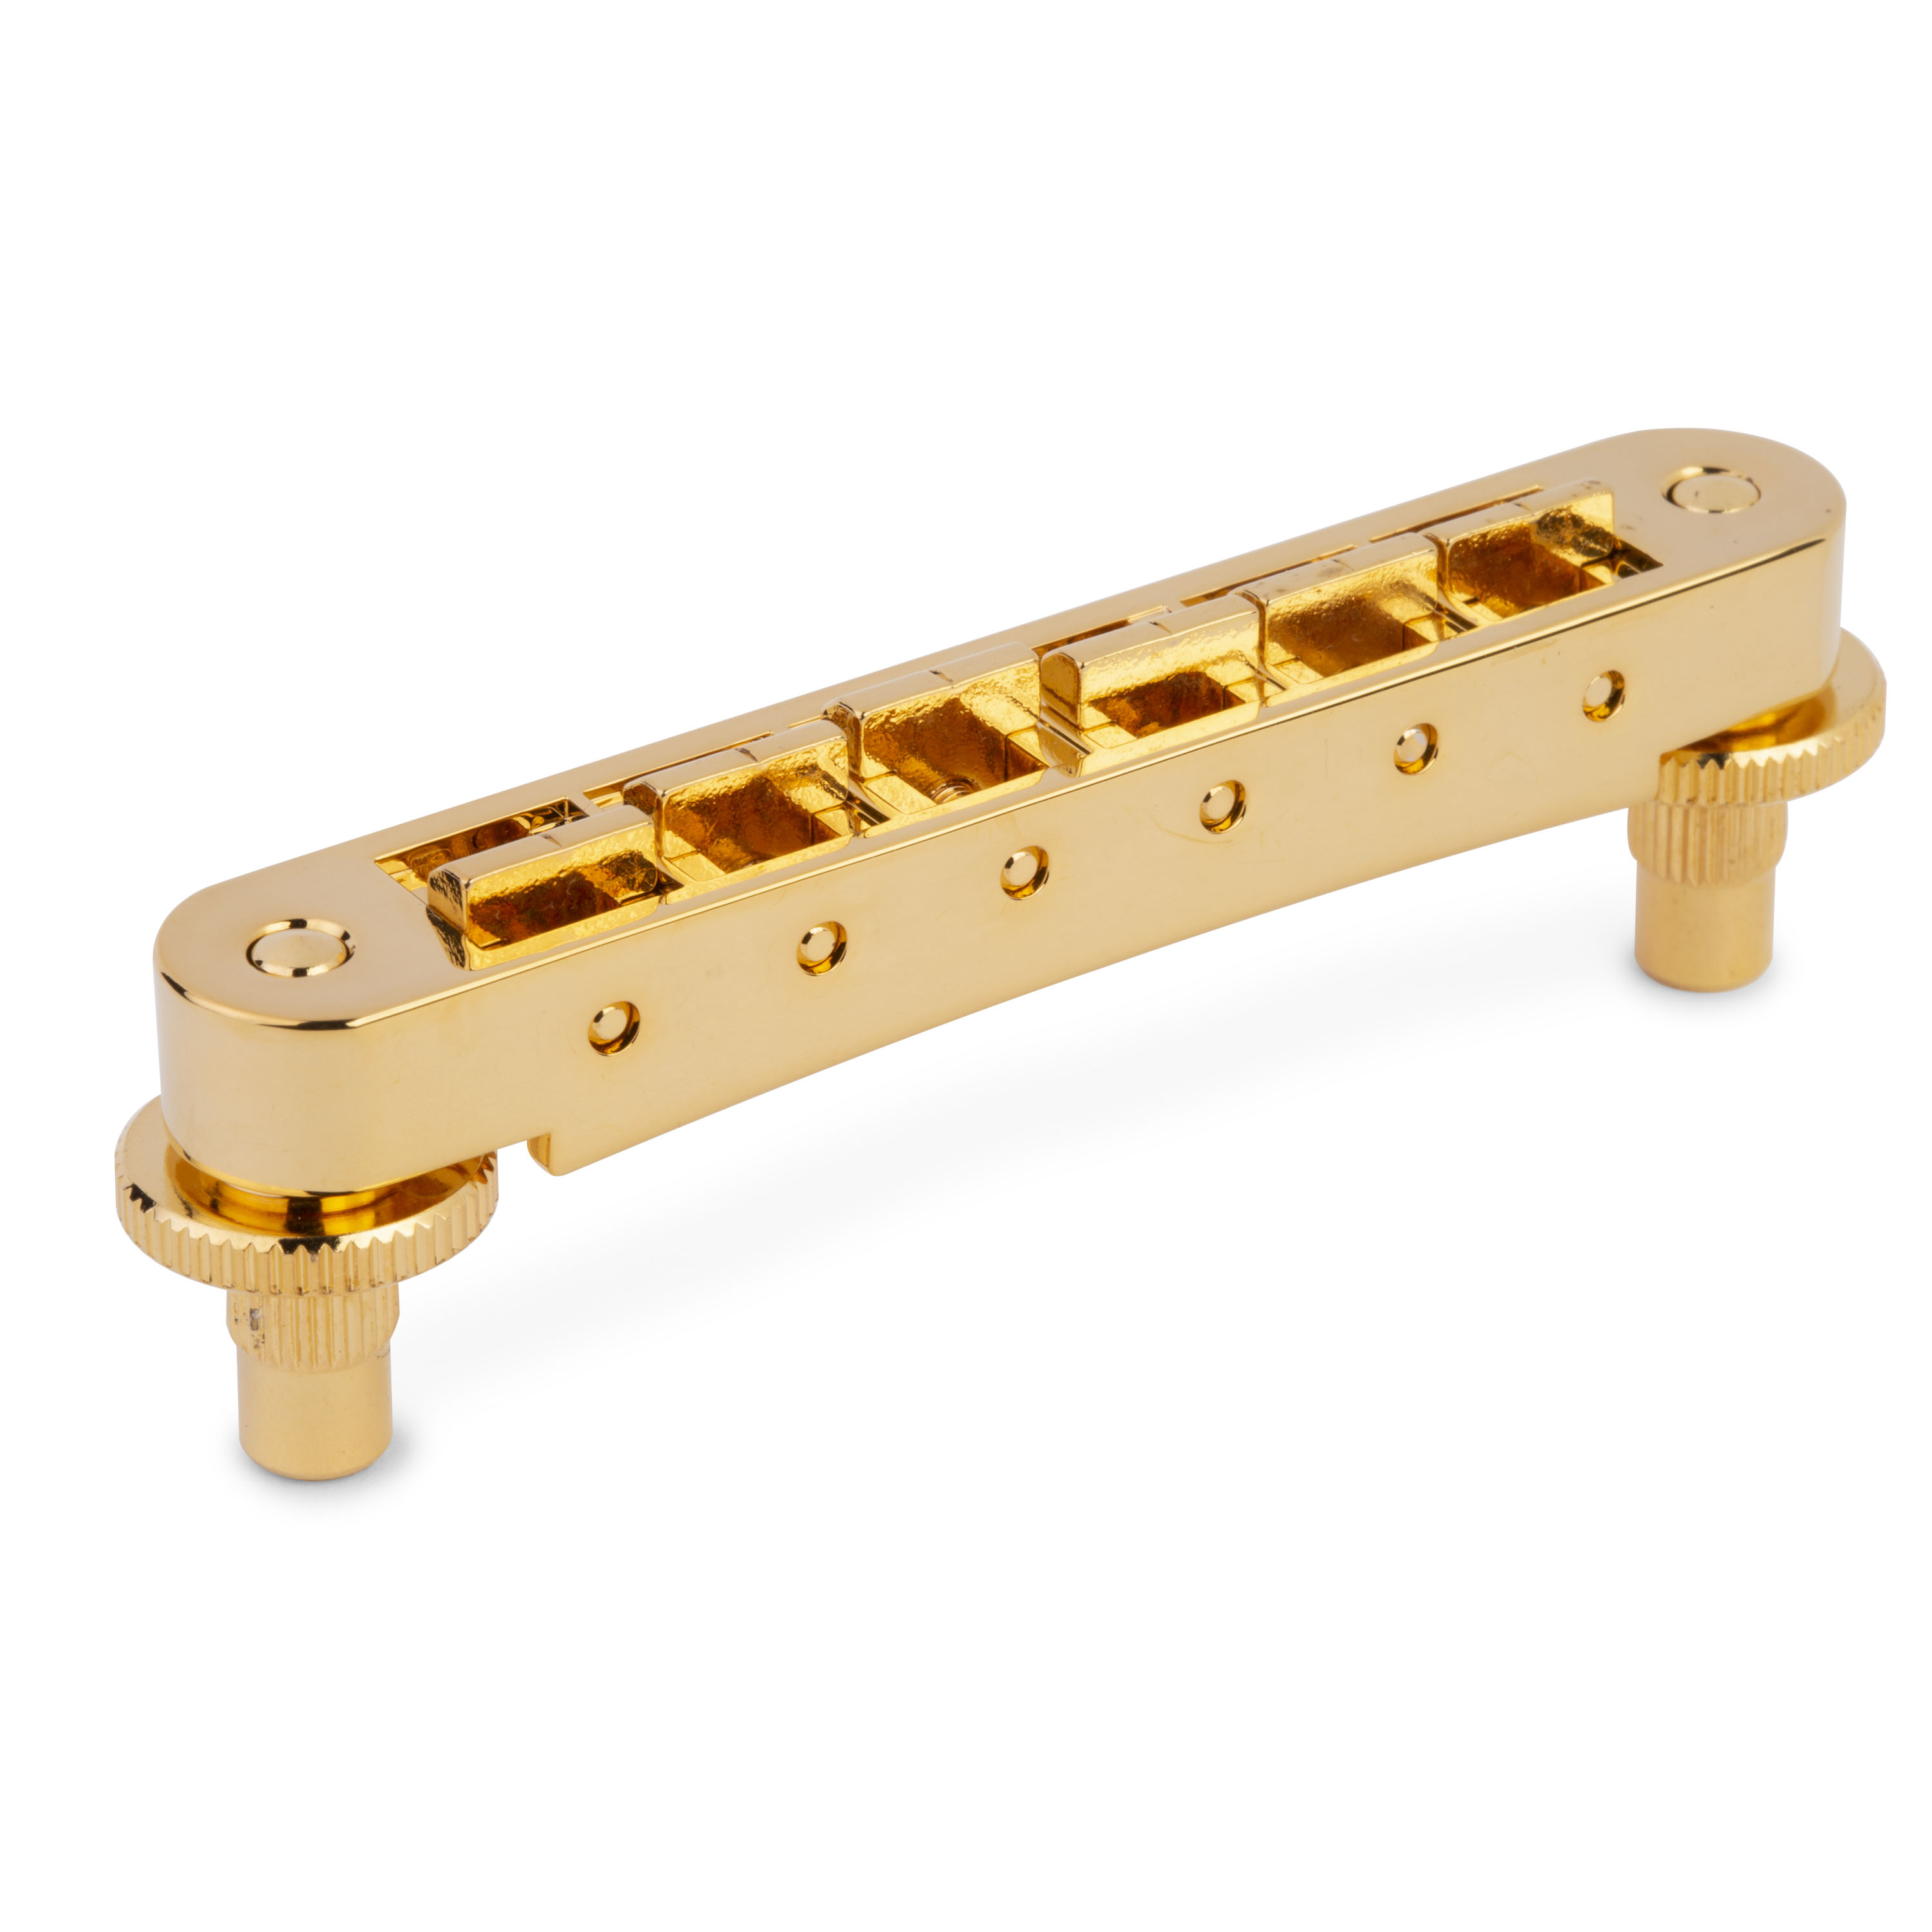 TonePros TP6A  Aluminum Tune-o-matic Bridge with Bell Brass Saddles